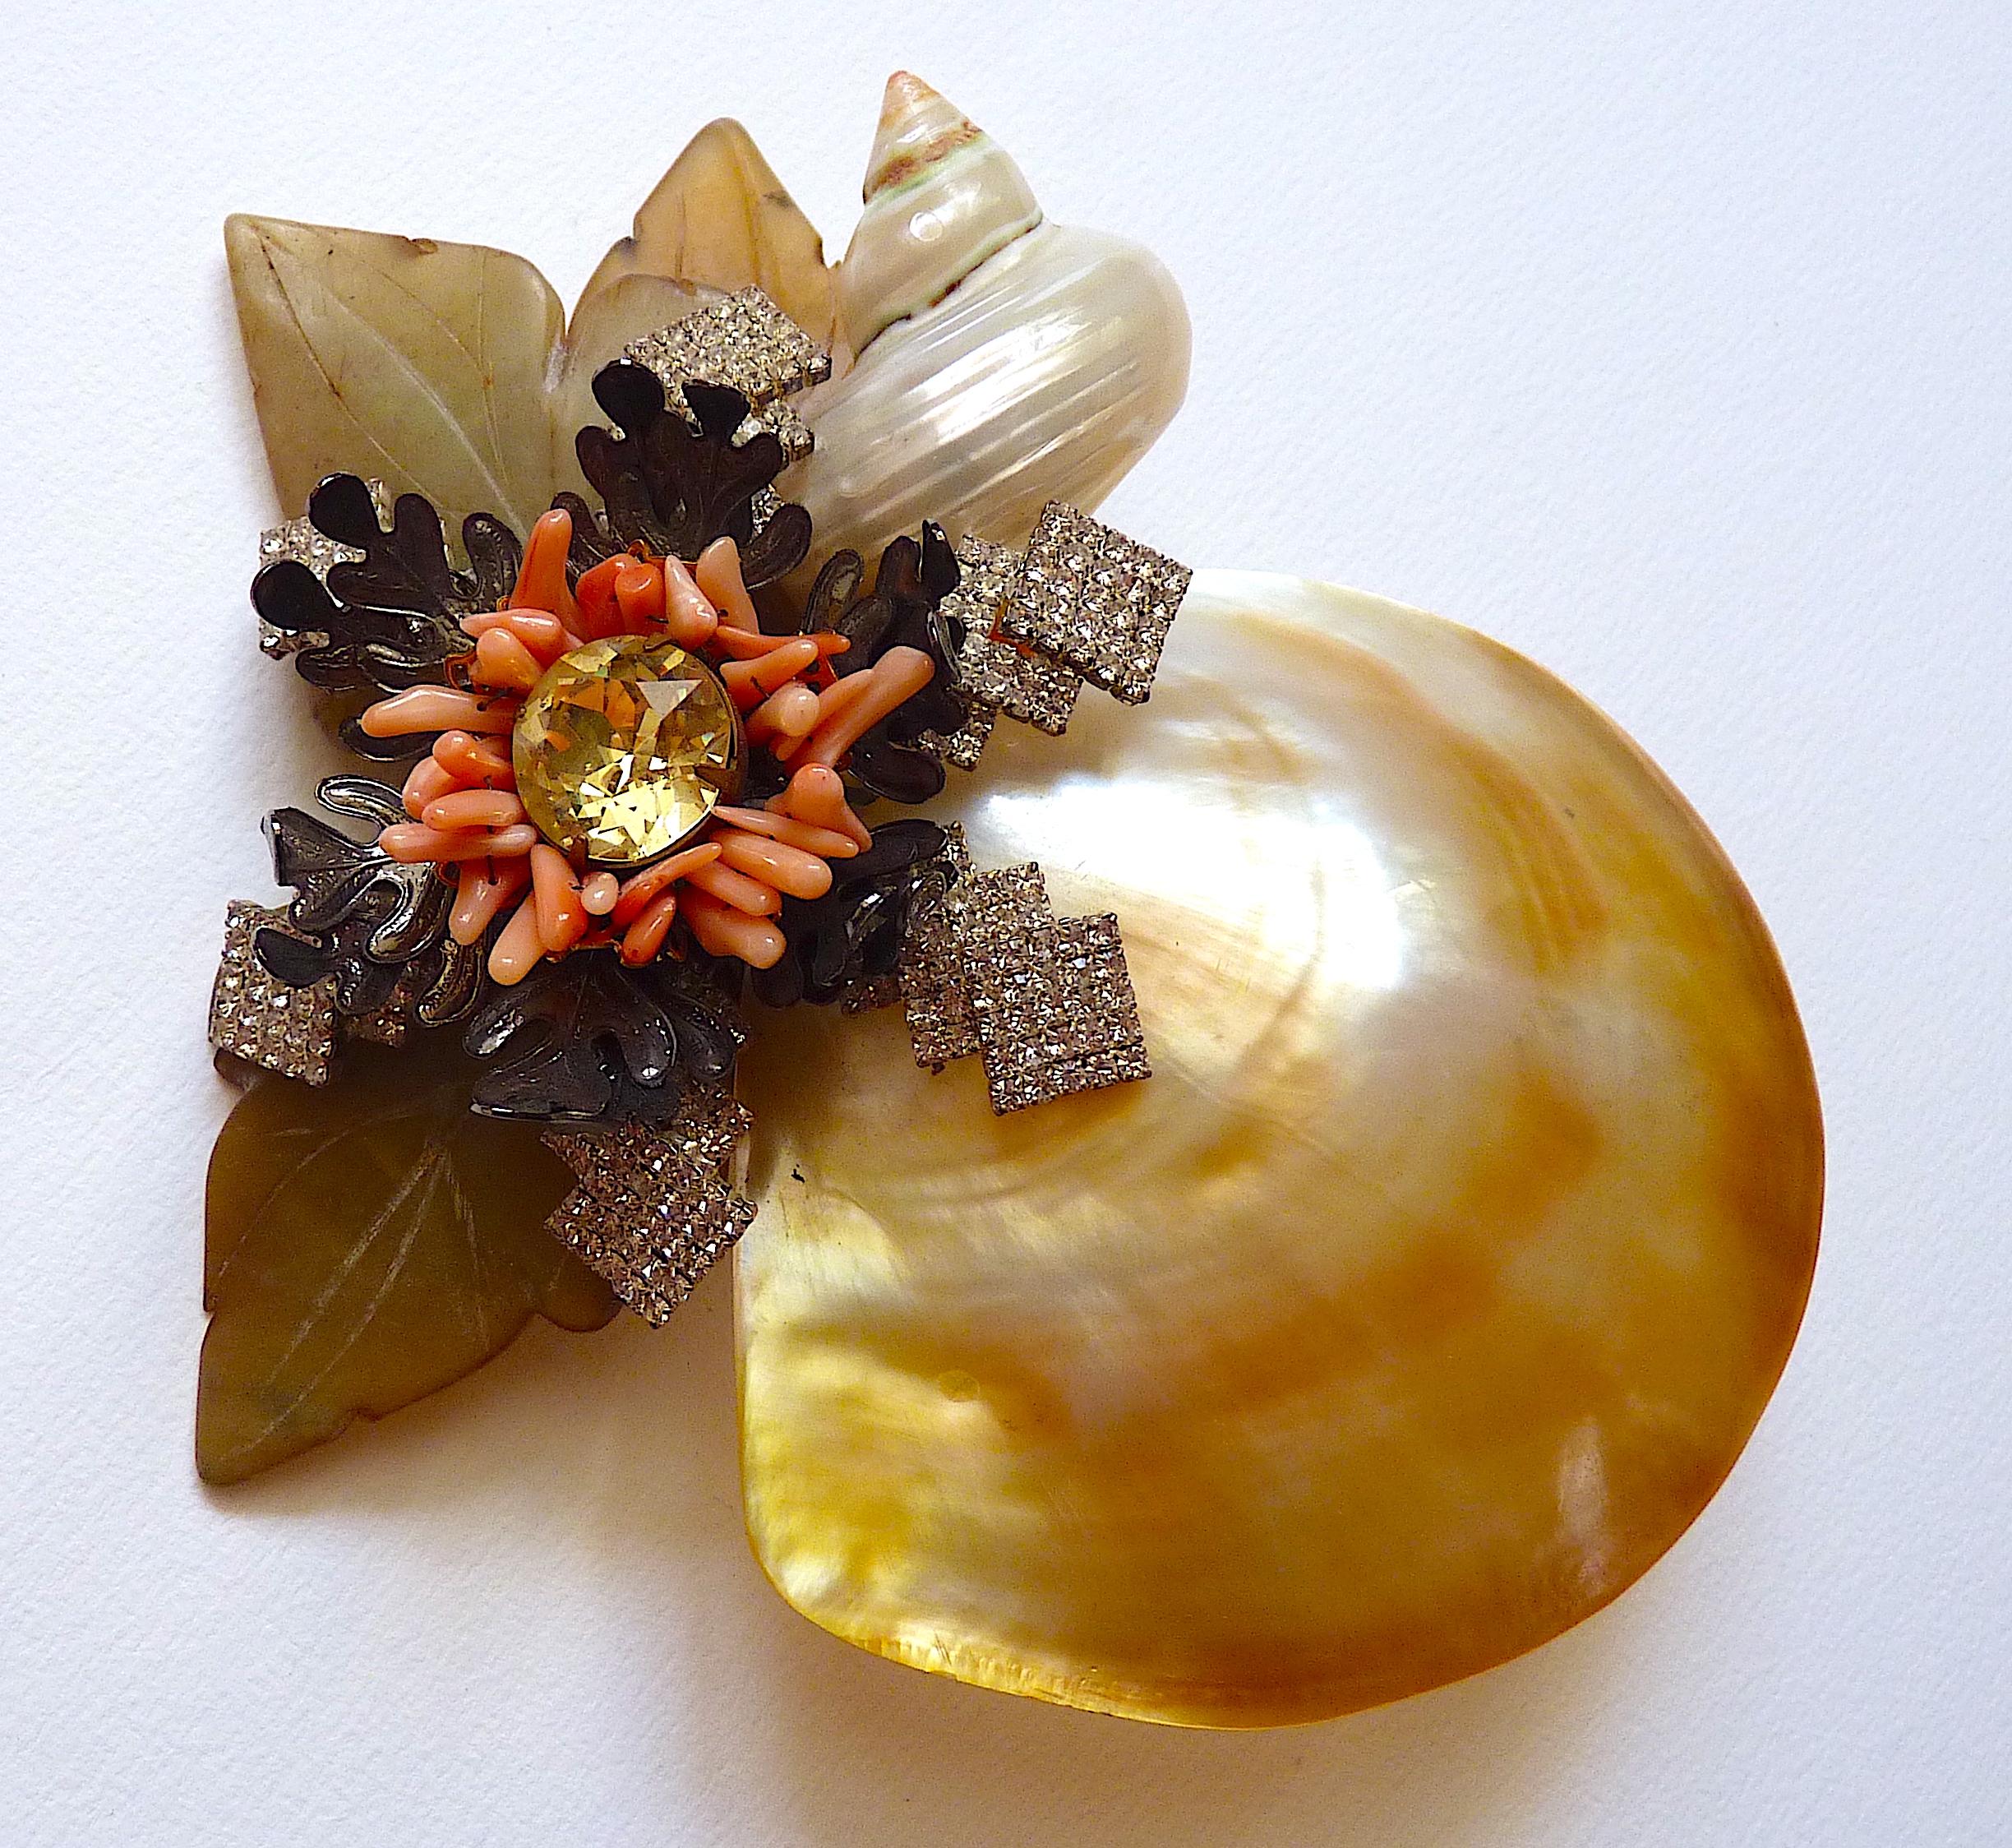 This is a Lawrence Vrba oversize Brooch made of oyster shell, sea shells, Glass Crystal and Poured Glass Beads, Vintage from the 1980s.
Vrba designed under his own name after working for famed American jewelry designer Miriam Haskell. 

Signed